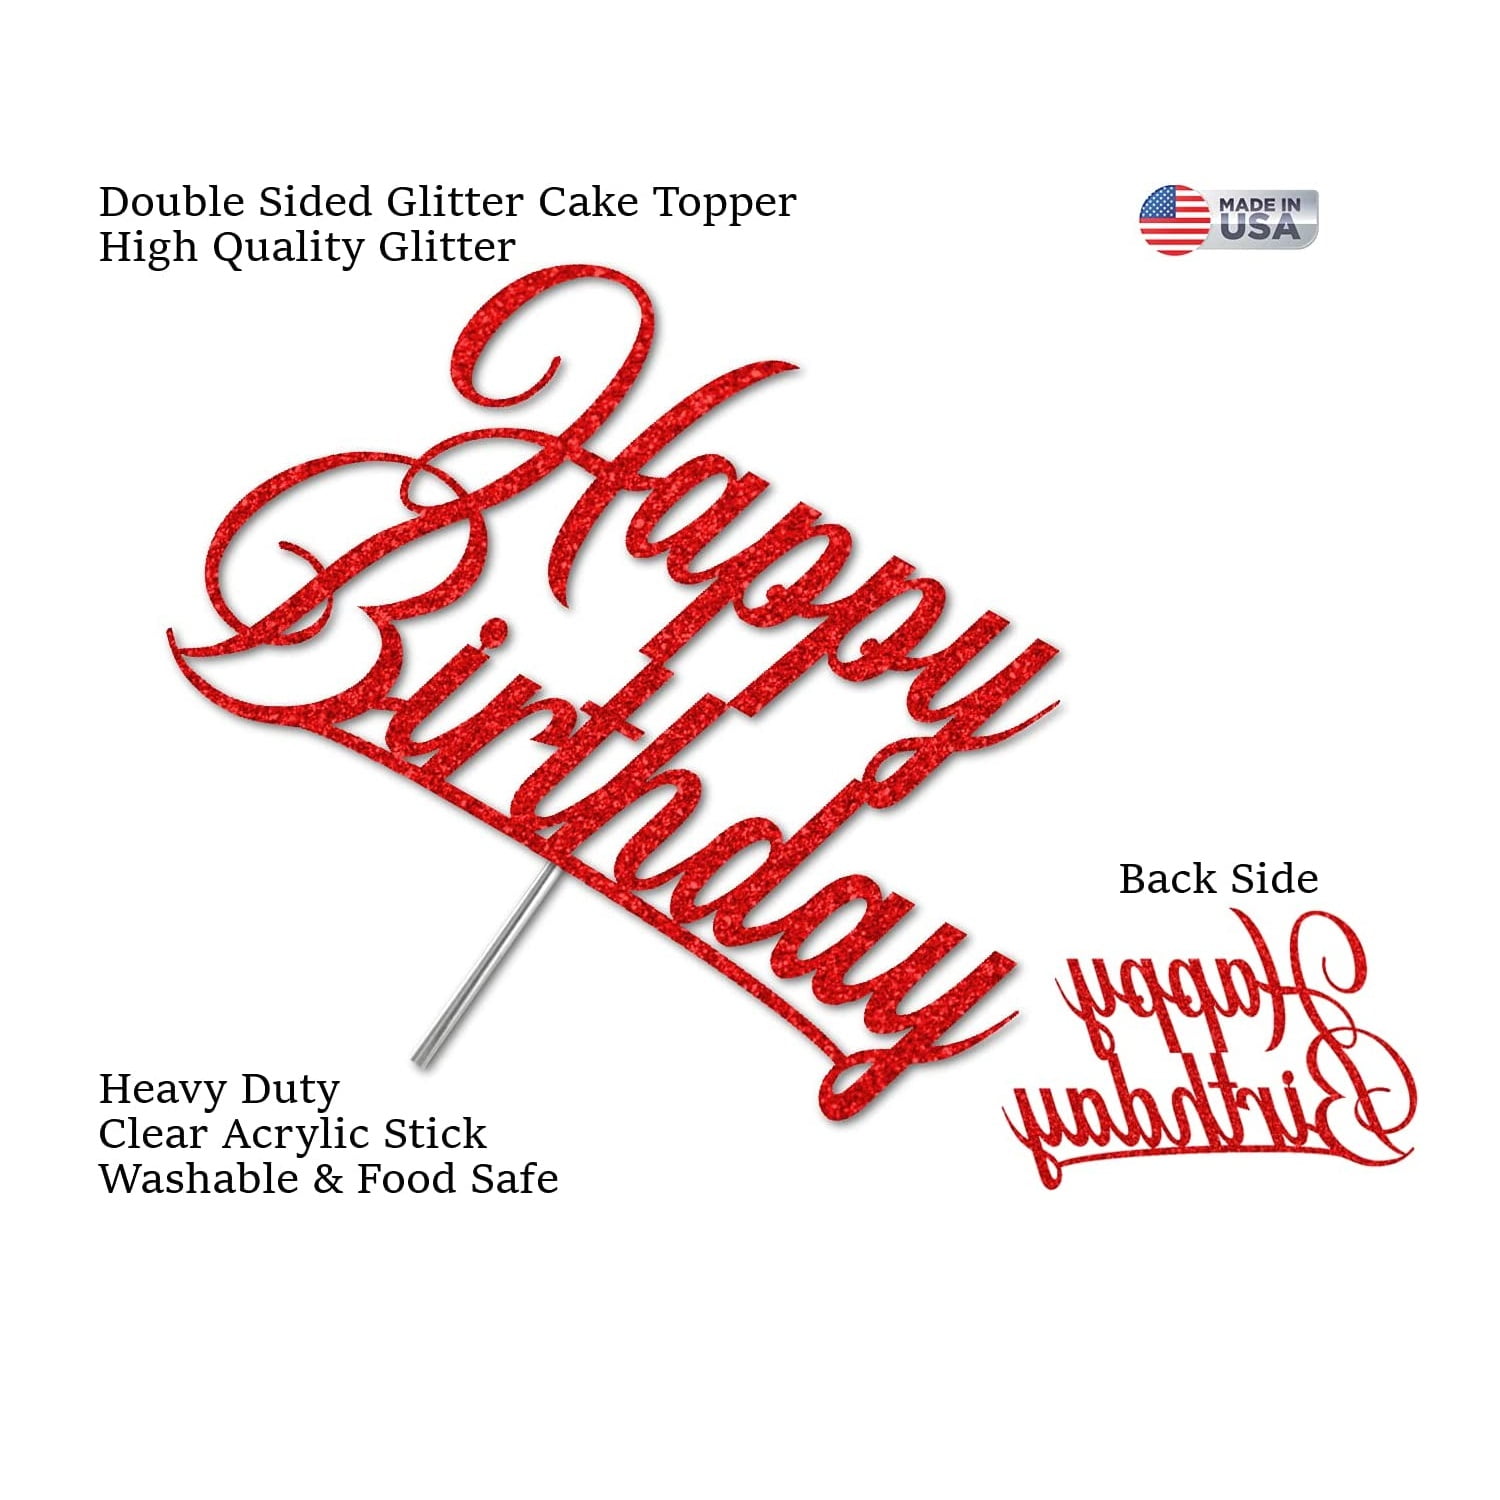 Happy Birthday Glitter Cake Topper, Birthday Party Decorations Ideas,  Premium Quality Decoration, Sturdy Doubled Sided Glitter, Acrylic Stick.  Made in